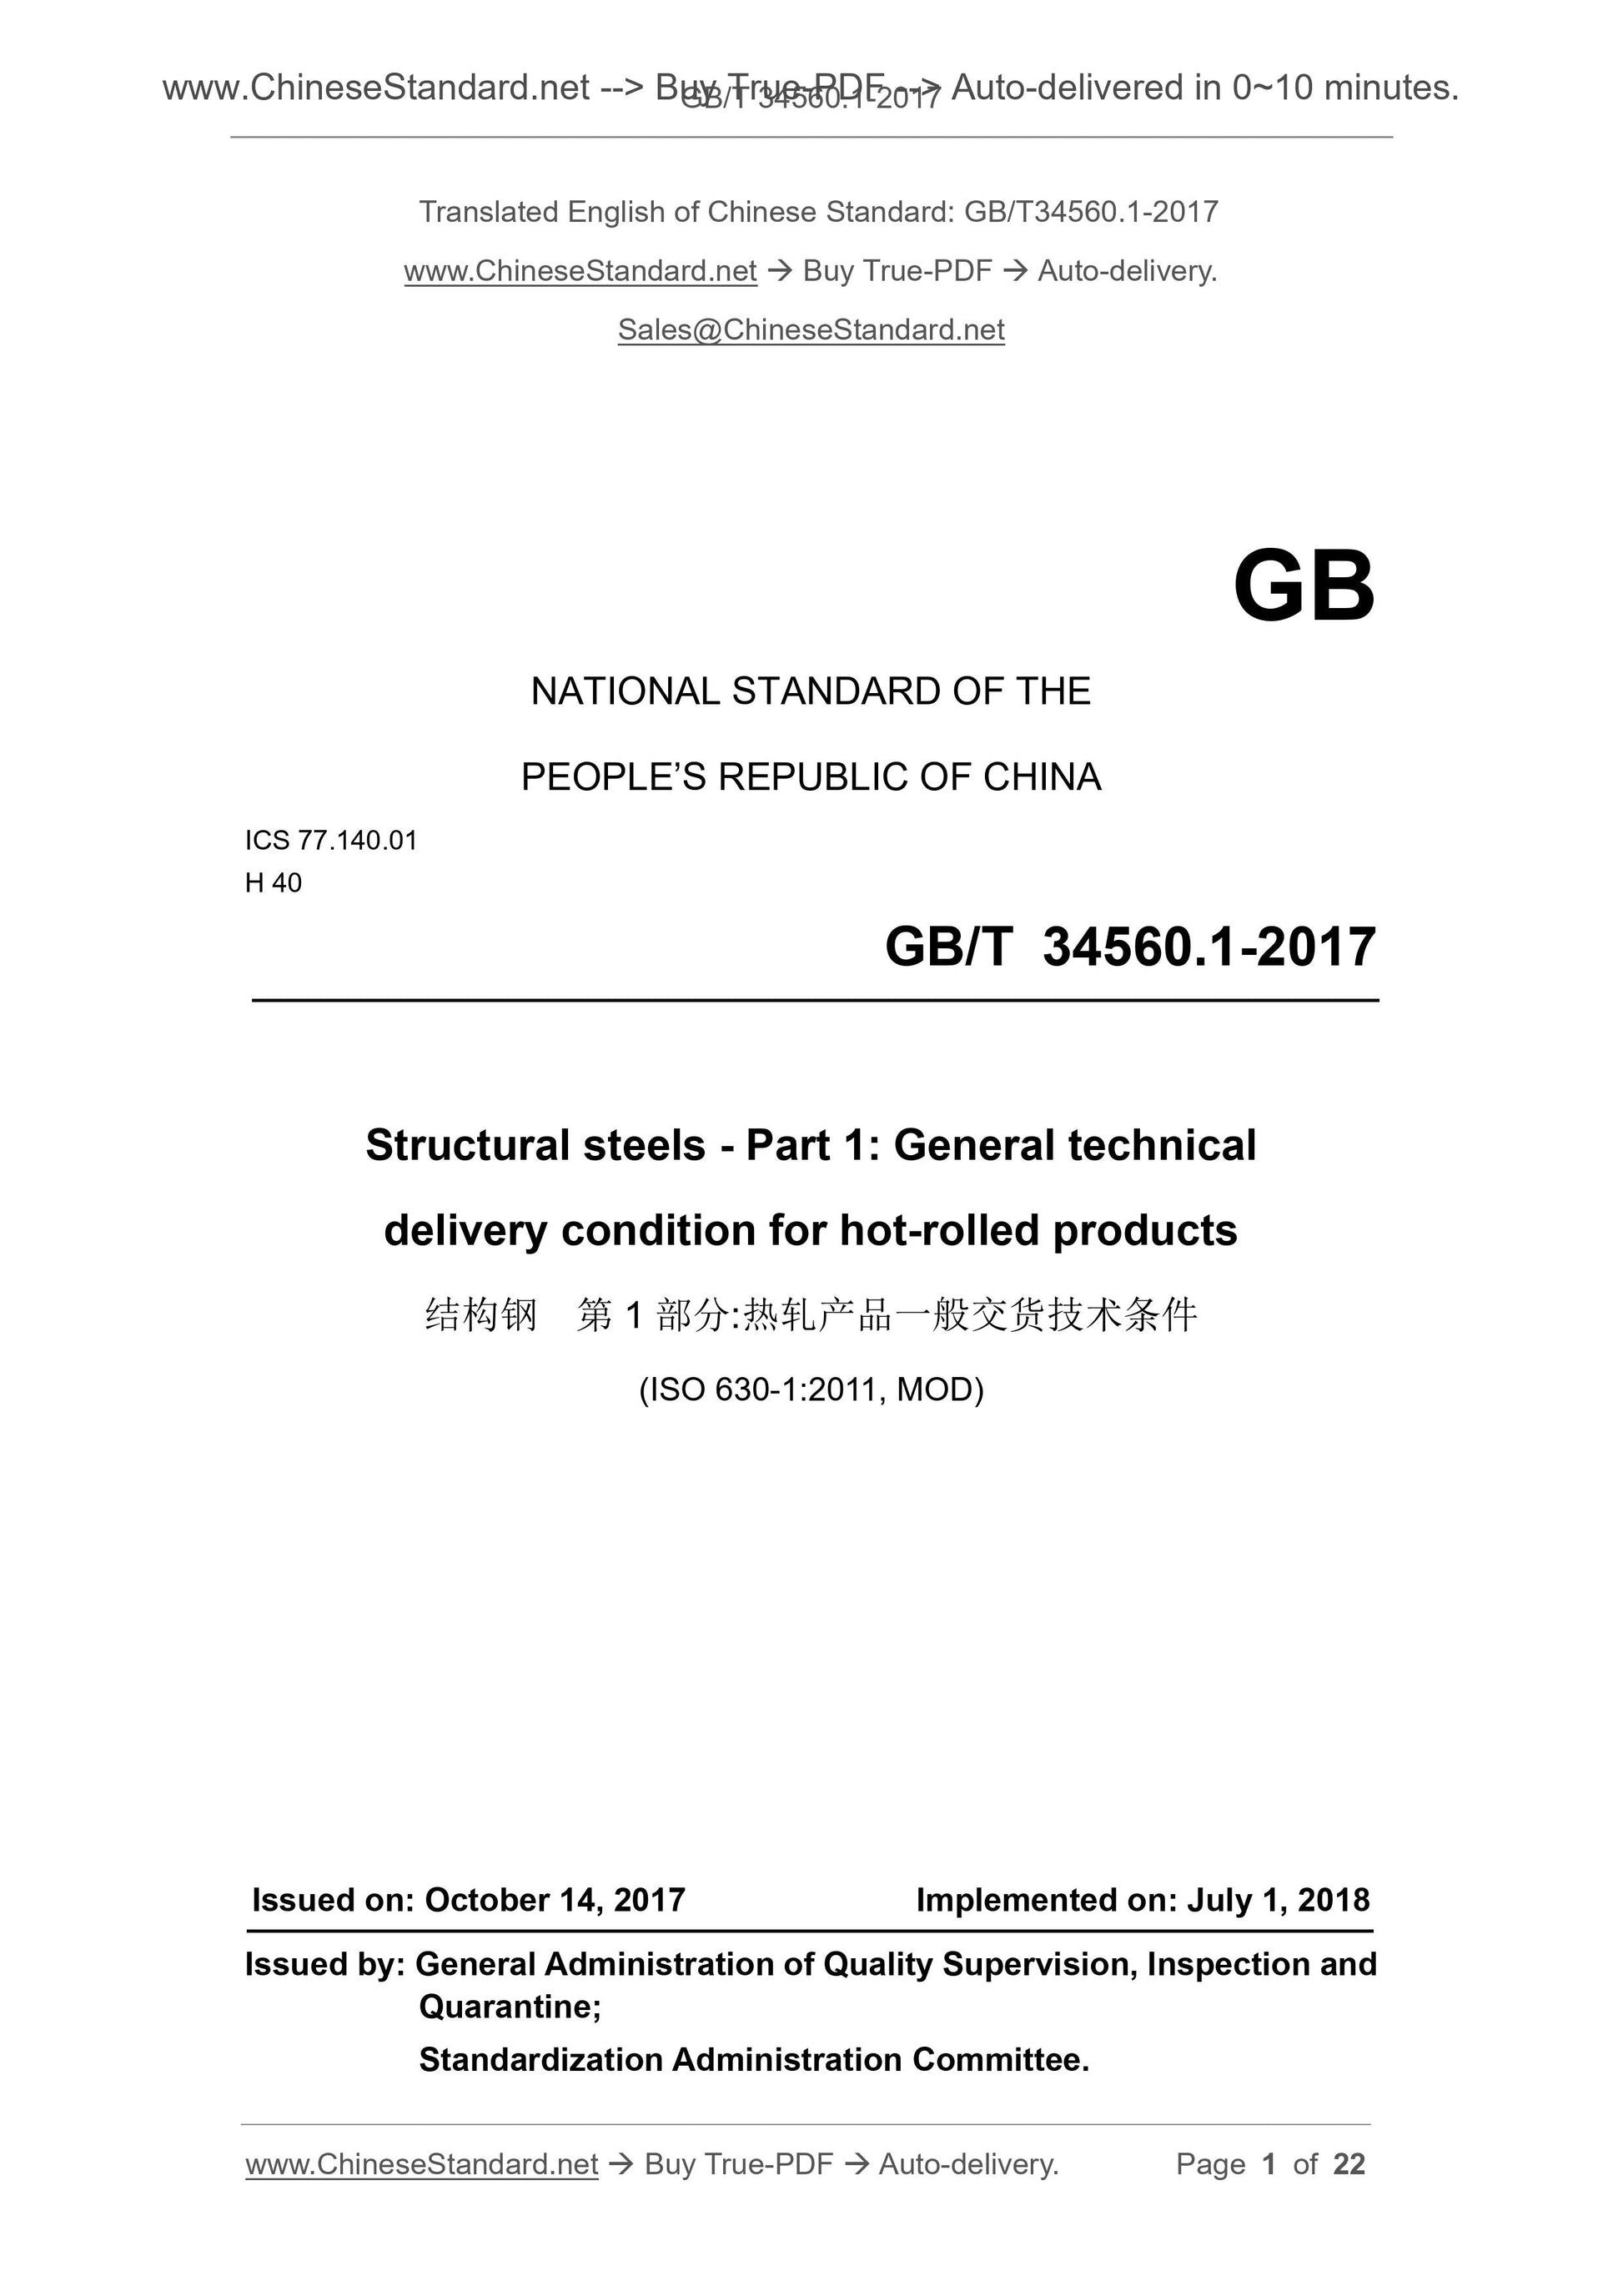 GB/T 34560.1-2017 Page 1